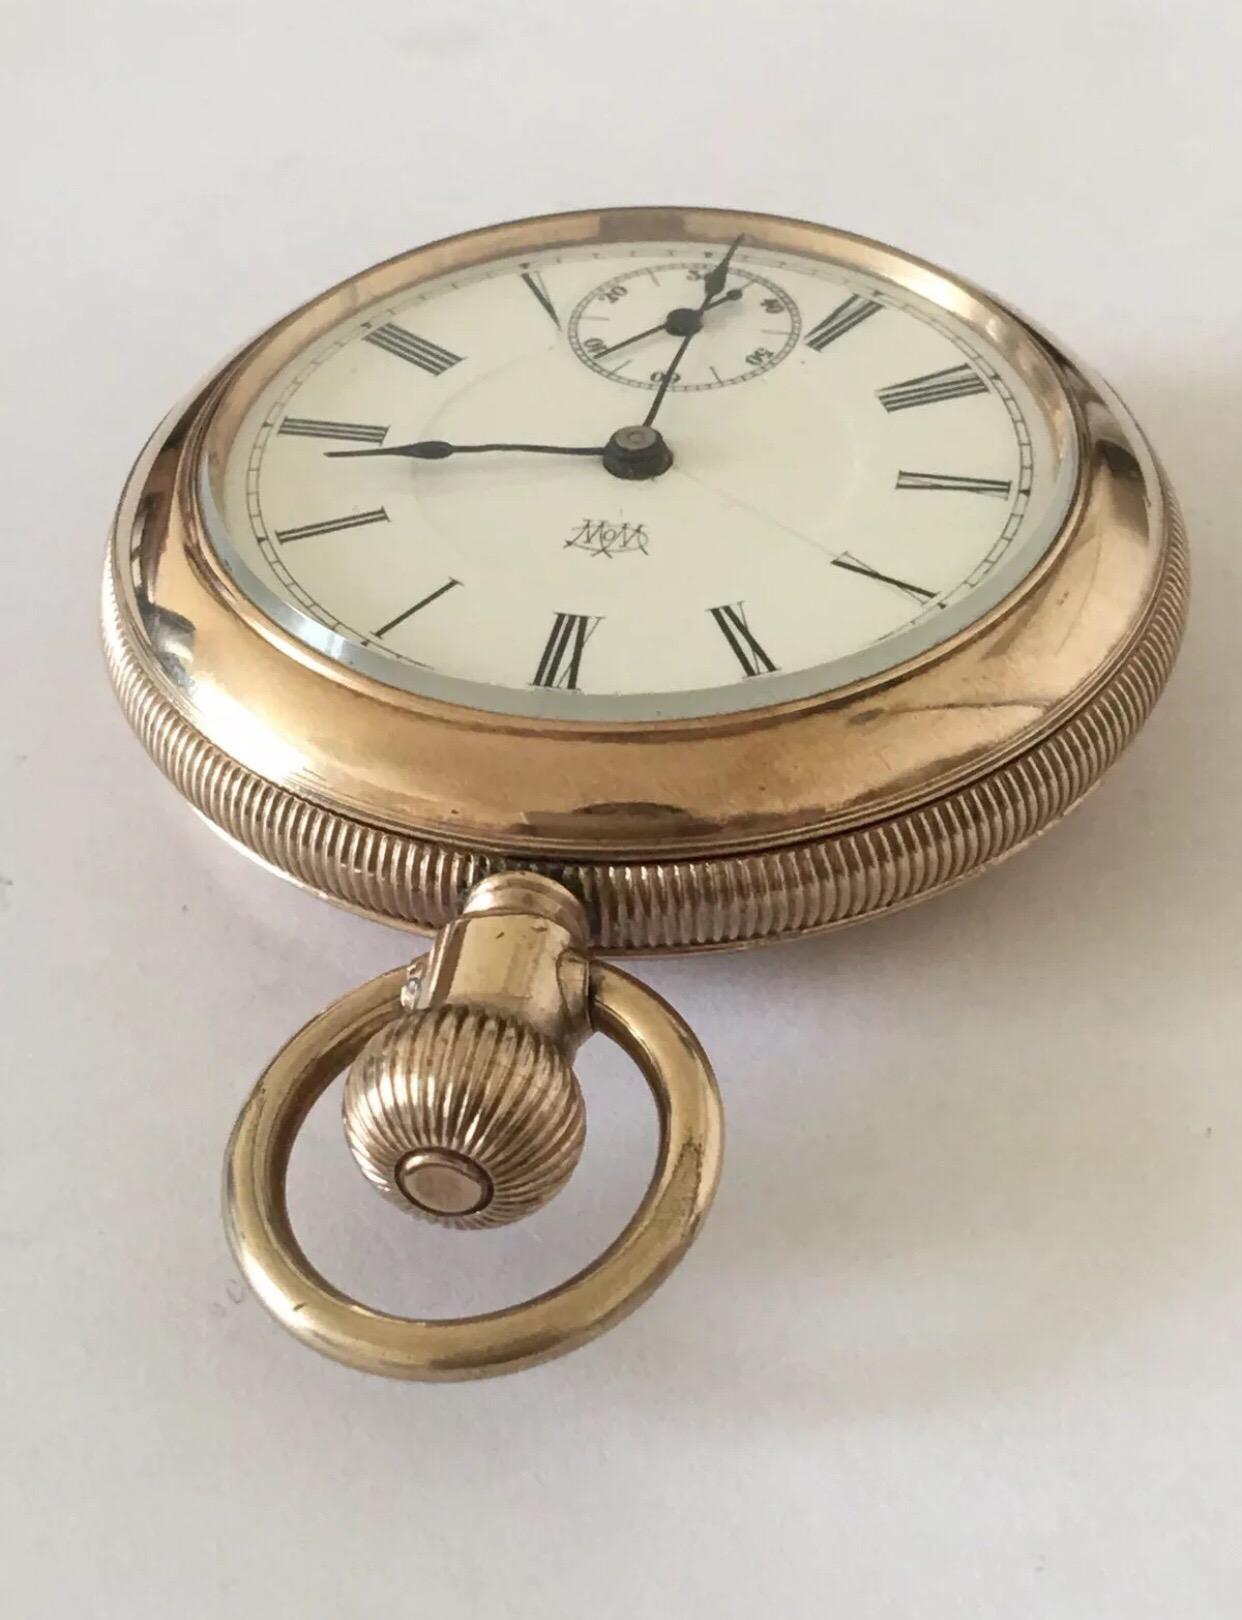 Women's or Men's Antique Gold Filled Duplex Pocket Watch by Charles Benedict Waterbury Watch Co For Sale